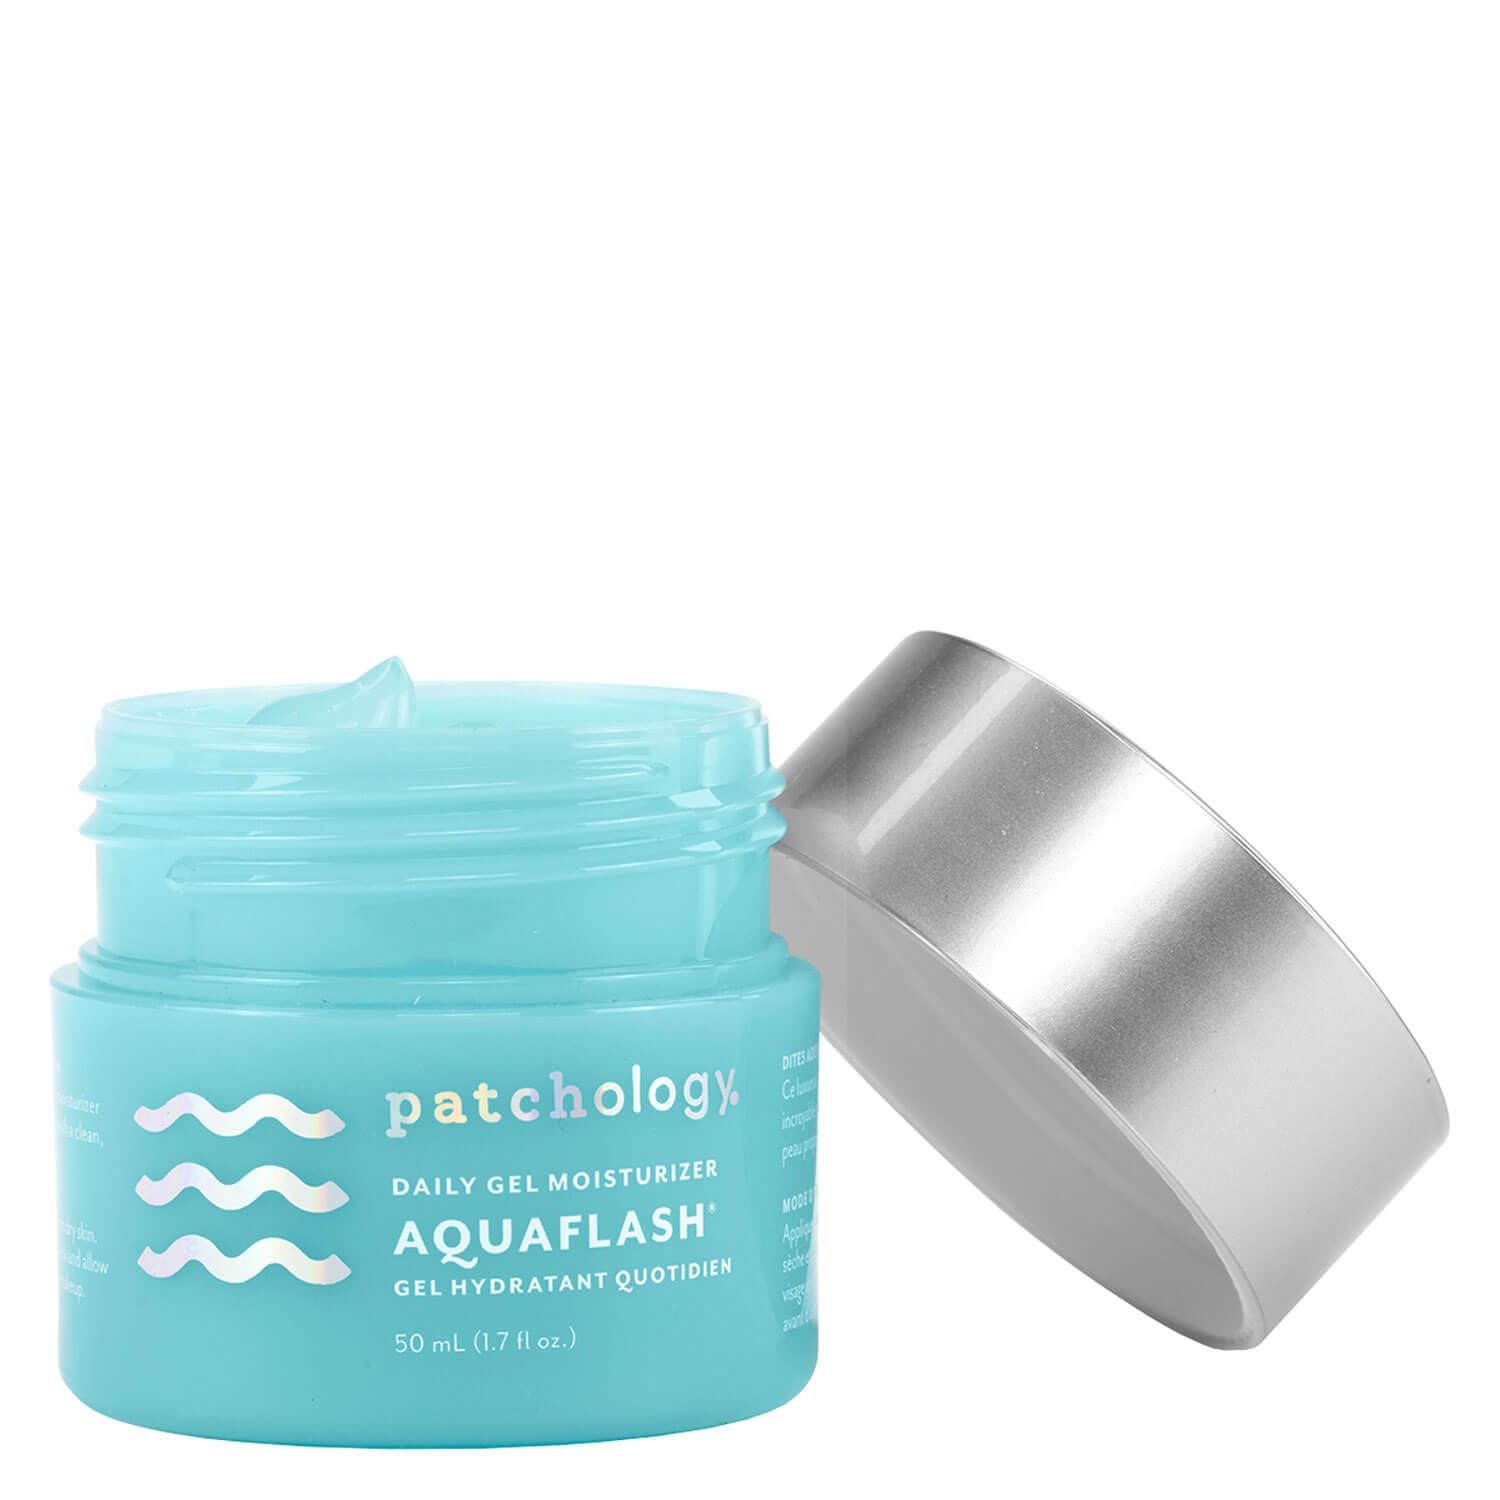 Product image from Daily Essentials - AquaFlash Gel Moisturizer